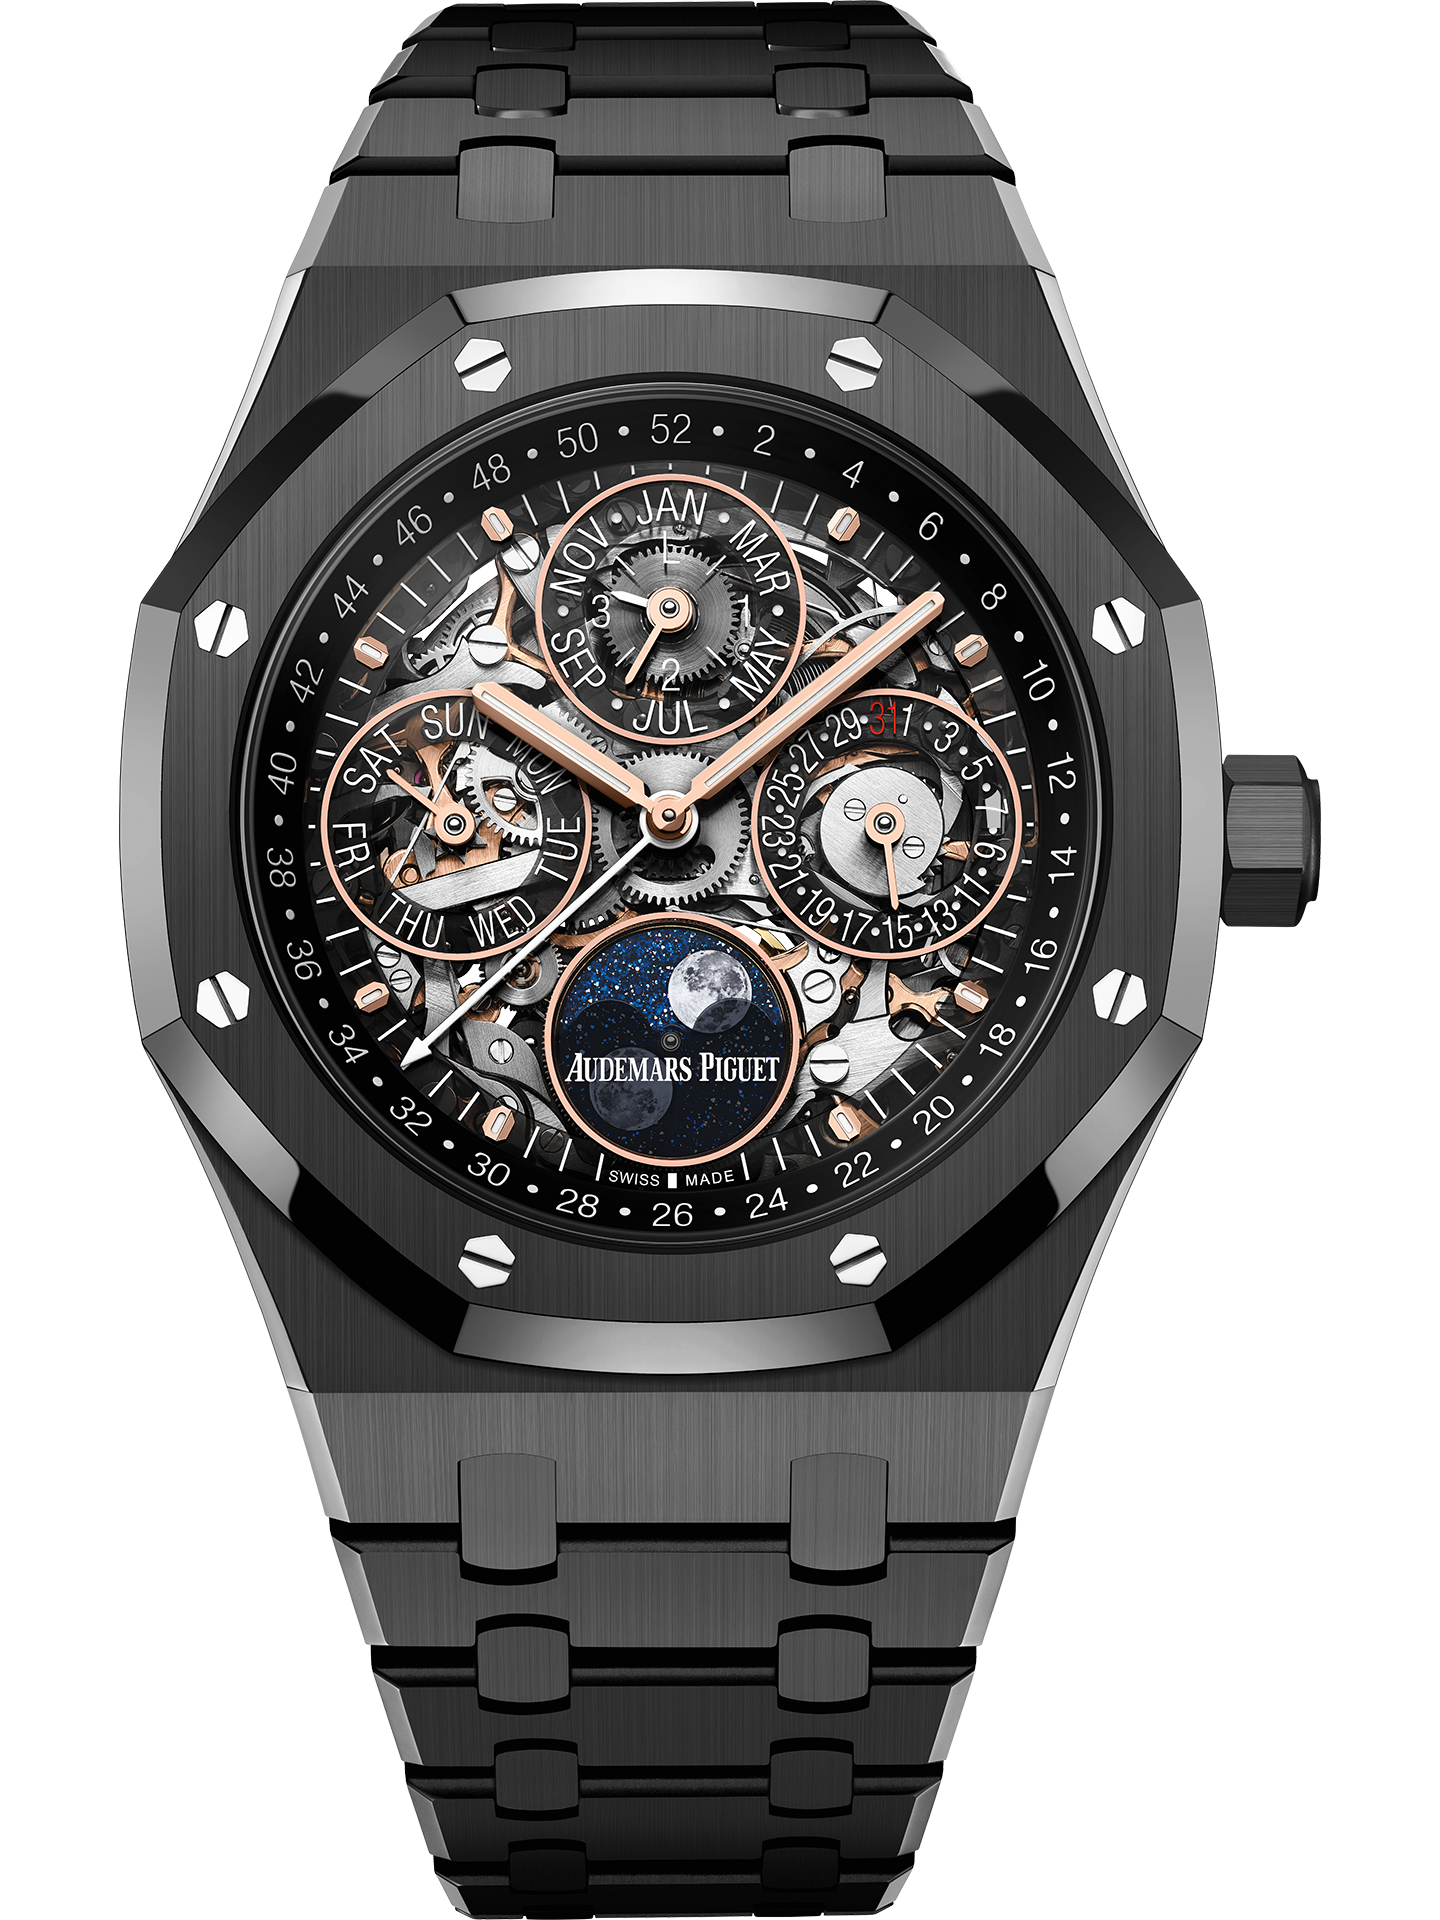 Audemars Piguet Perpetual Calendar Black Ceramic Black Dial for $228,000  for sale from a Trusted Seller on Chrono24